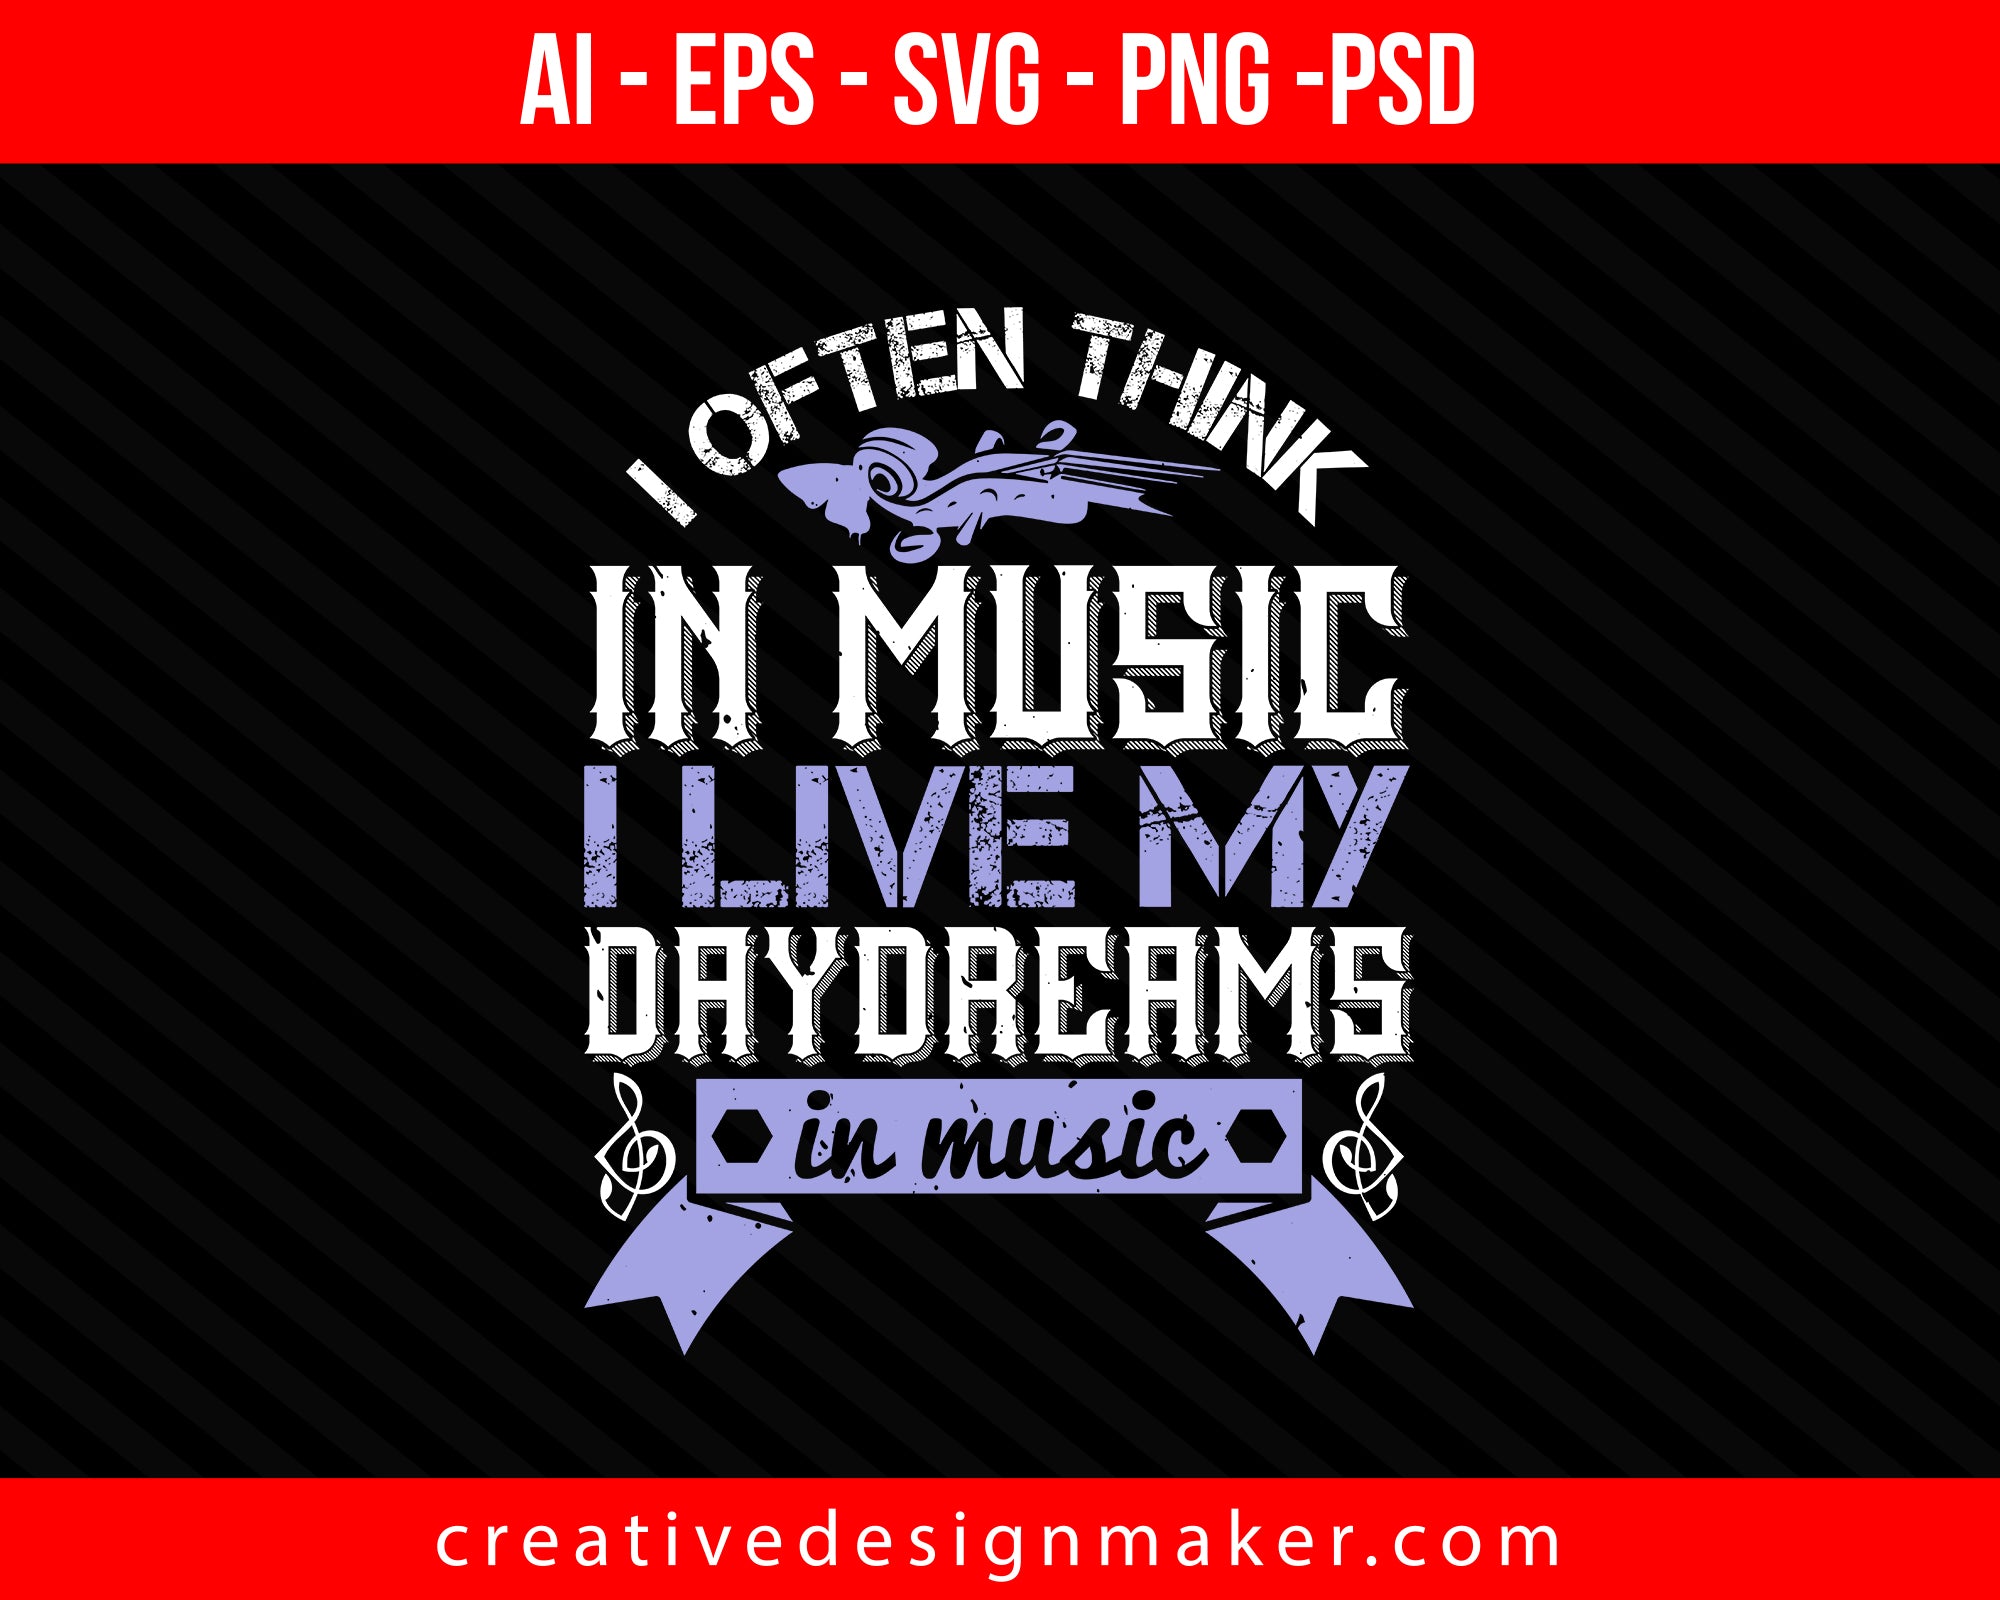 I often think in music. I live my daydreams in music Violin Print Ready Editable T-Shirt SVG Design!